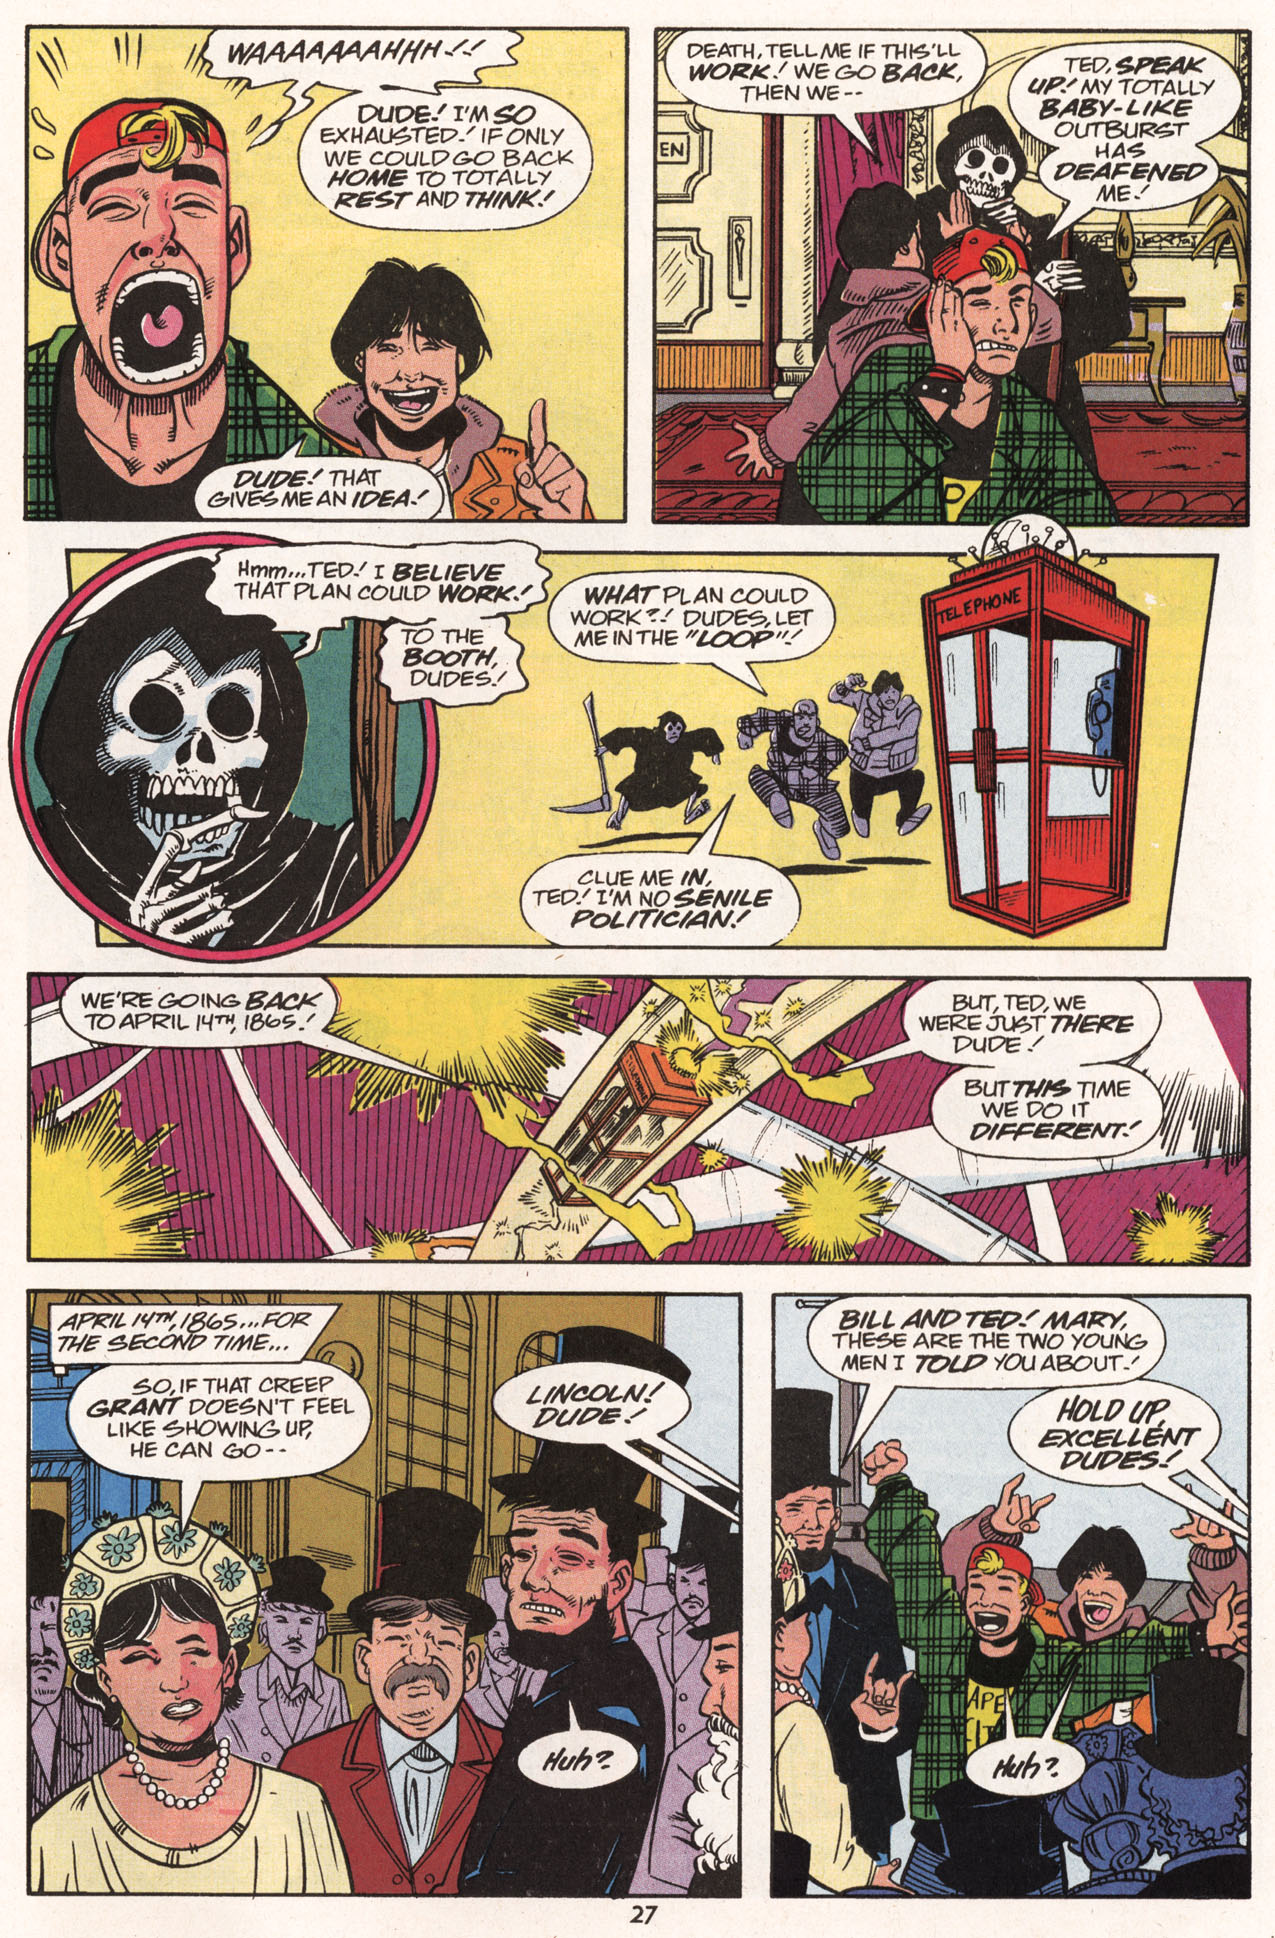 Read online Bill & Ted's Excellent Comic Book comic -  Issue #11 - 26